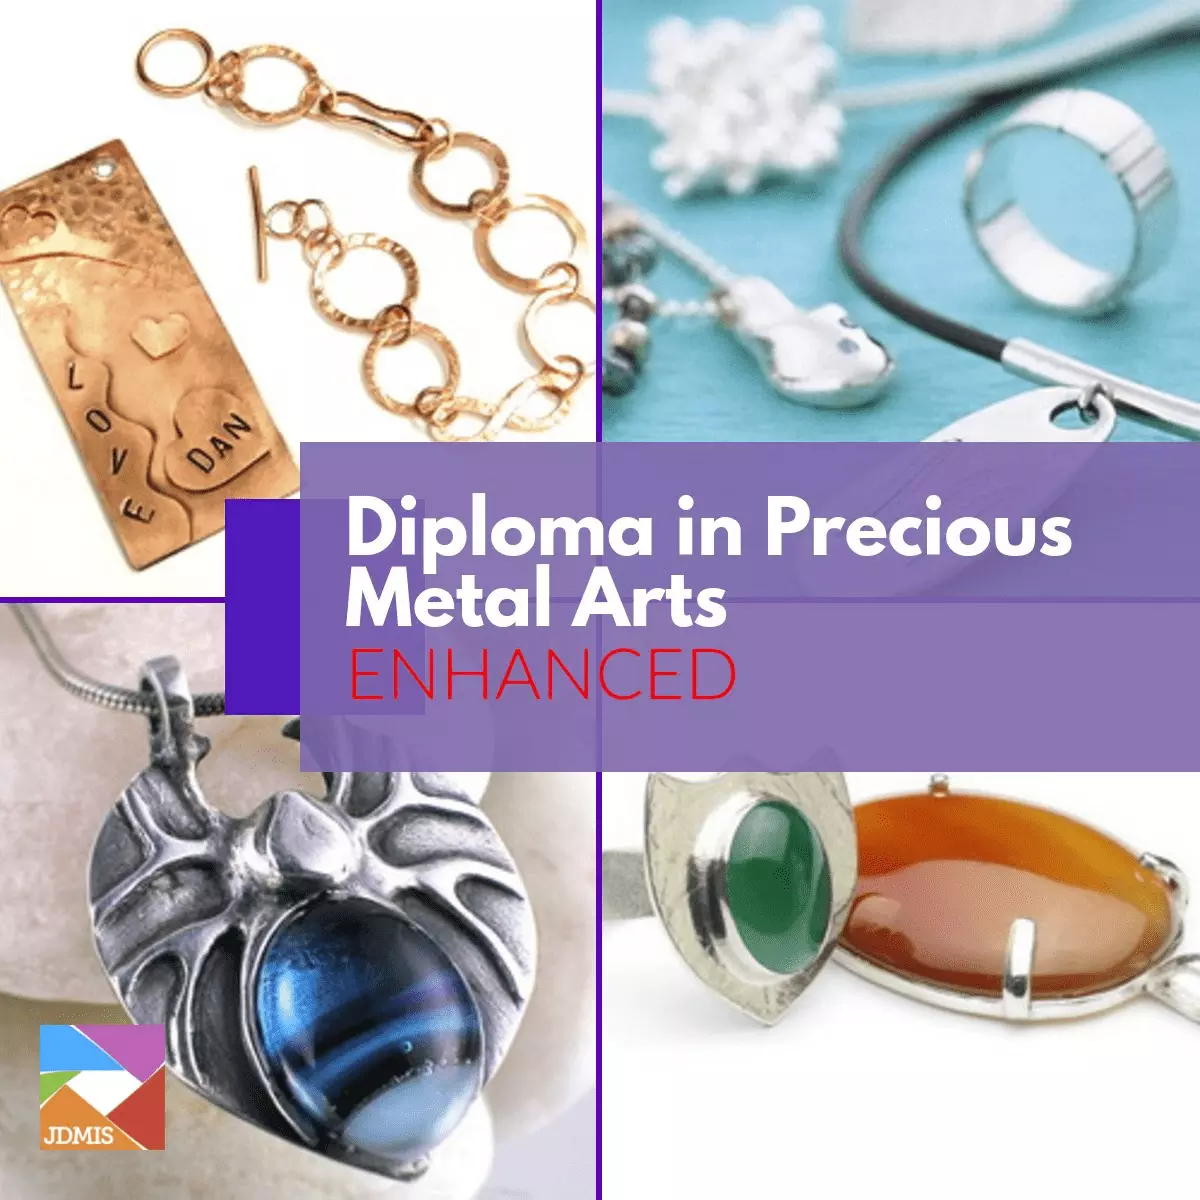 Jewellery artists rely on their taste, style and eye for detail – but often do not have the tools or understanding needed to execute their best ideas. Working with...